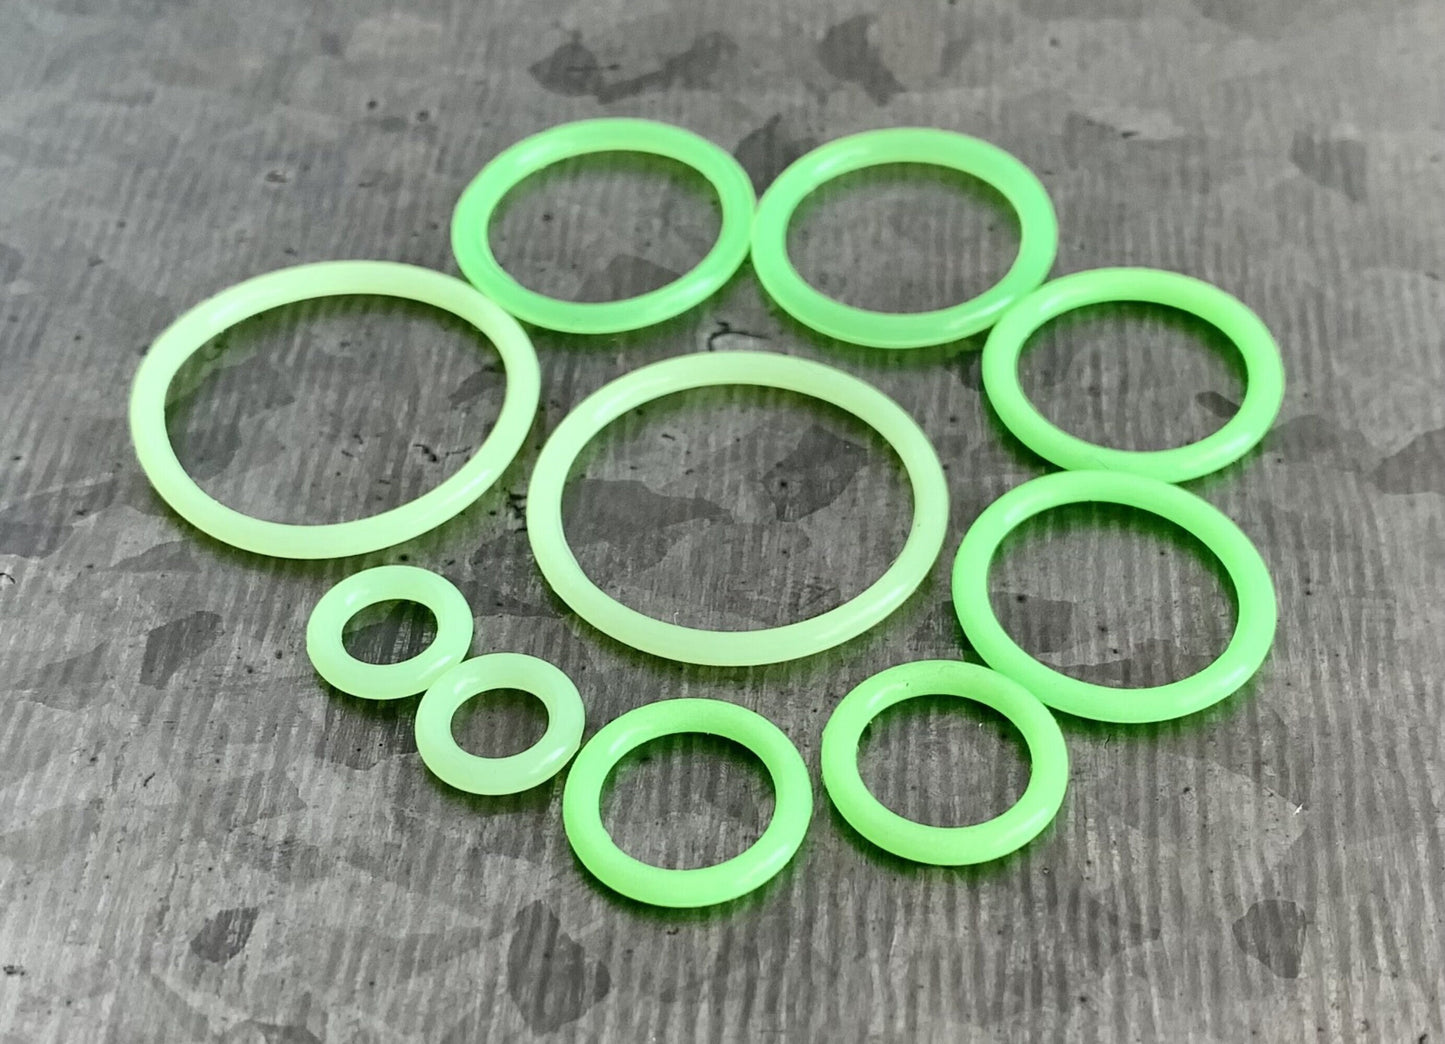 10 pack of Green Replacement O-Rings Bands for Plugs or Tunnels - 13 more colors available!